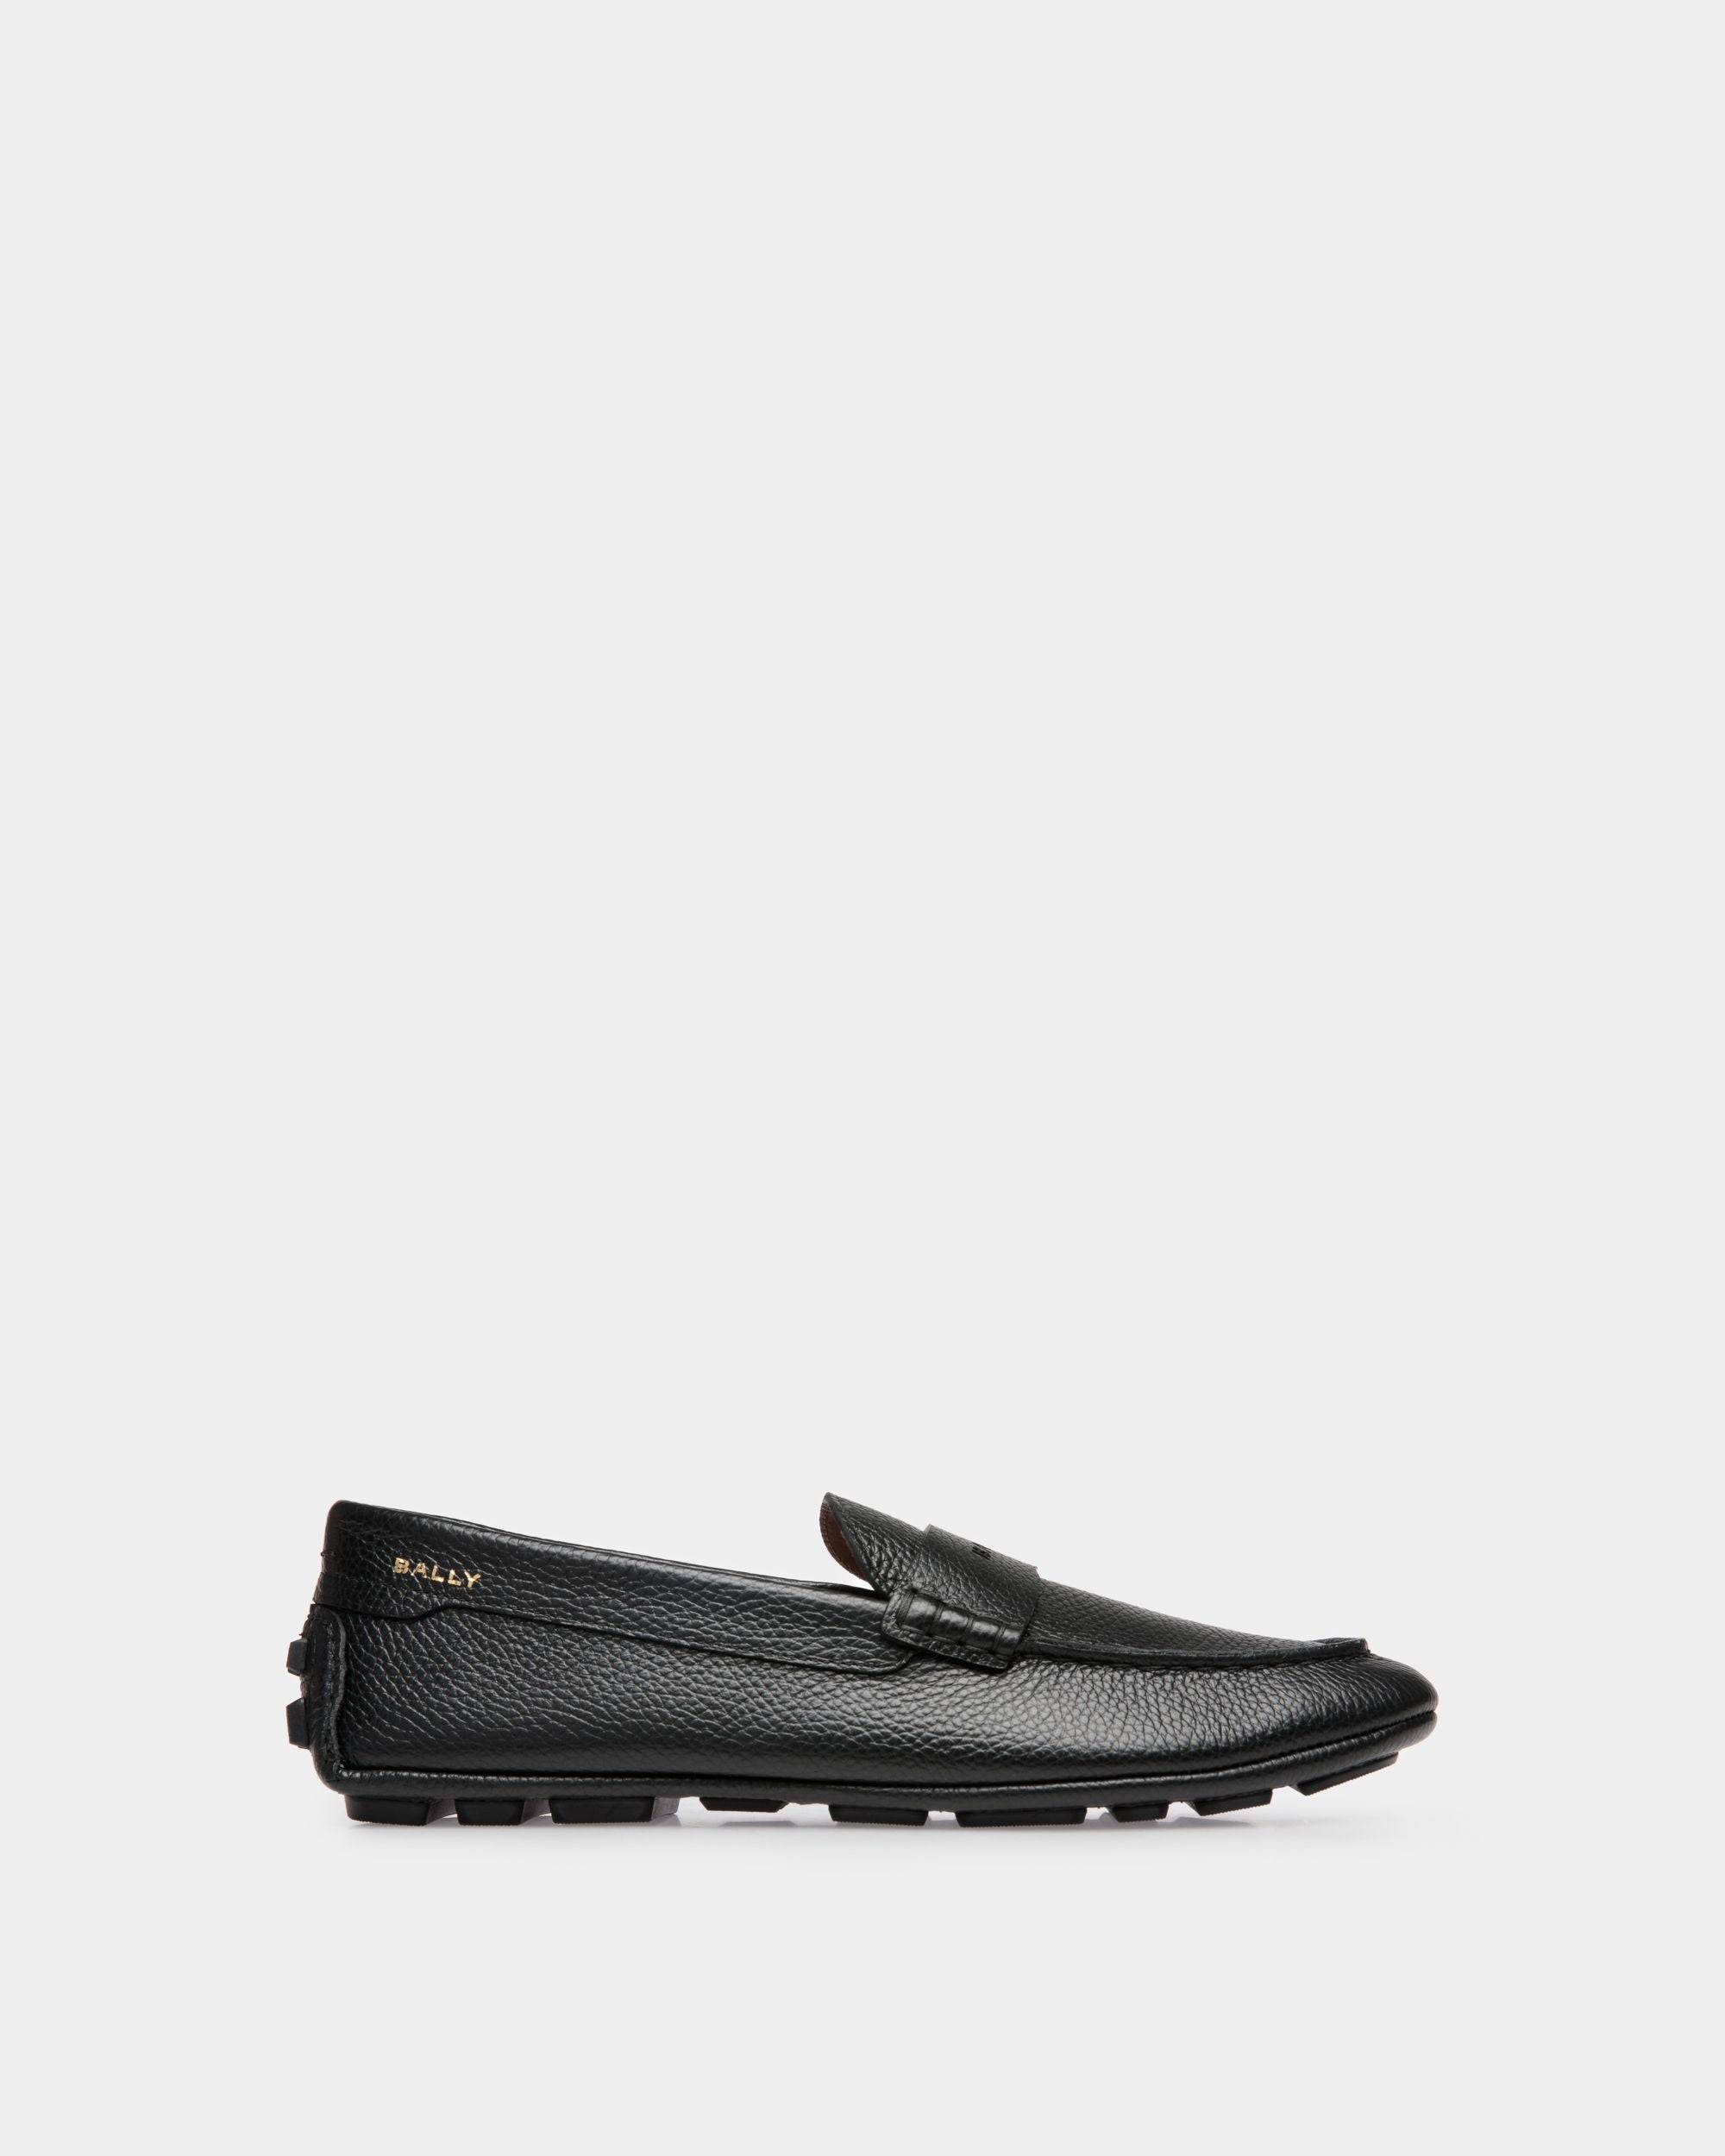 Kerbs | Men's Driver in Black Grained Leather | Bally | Still Life Side